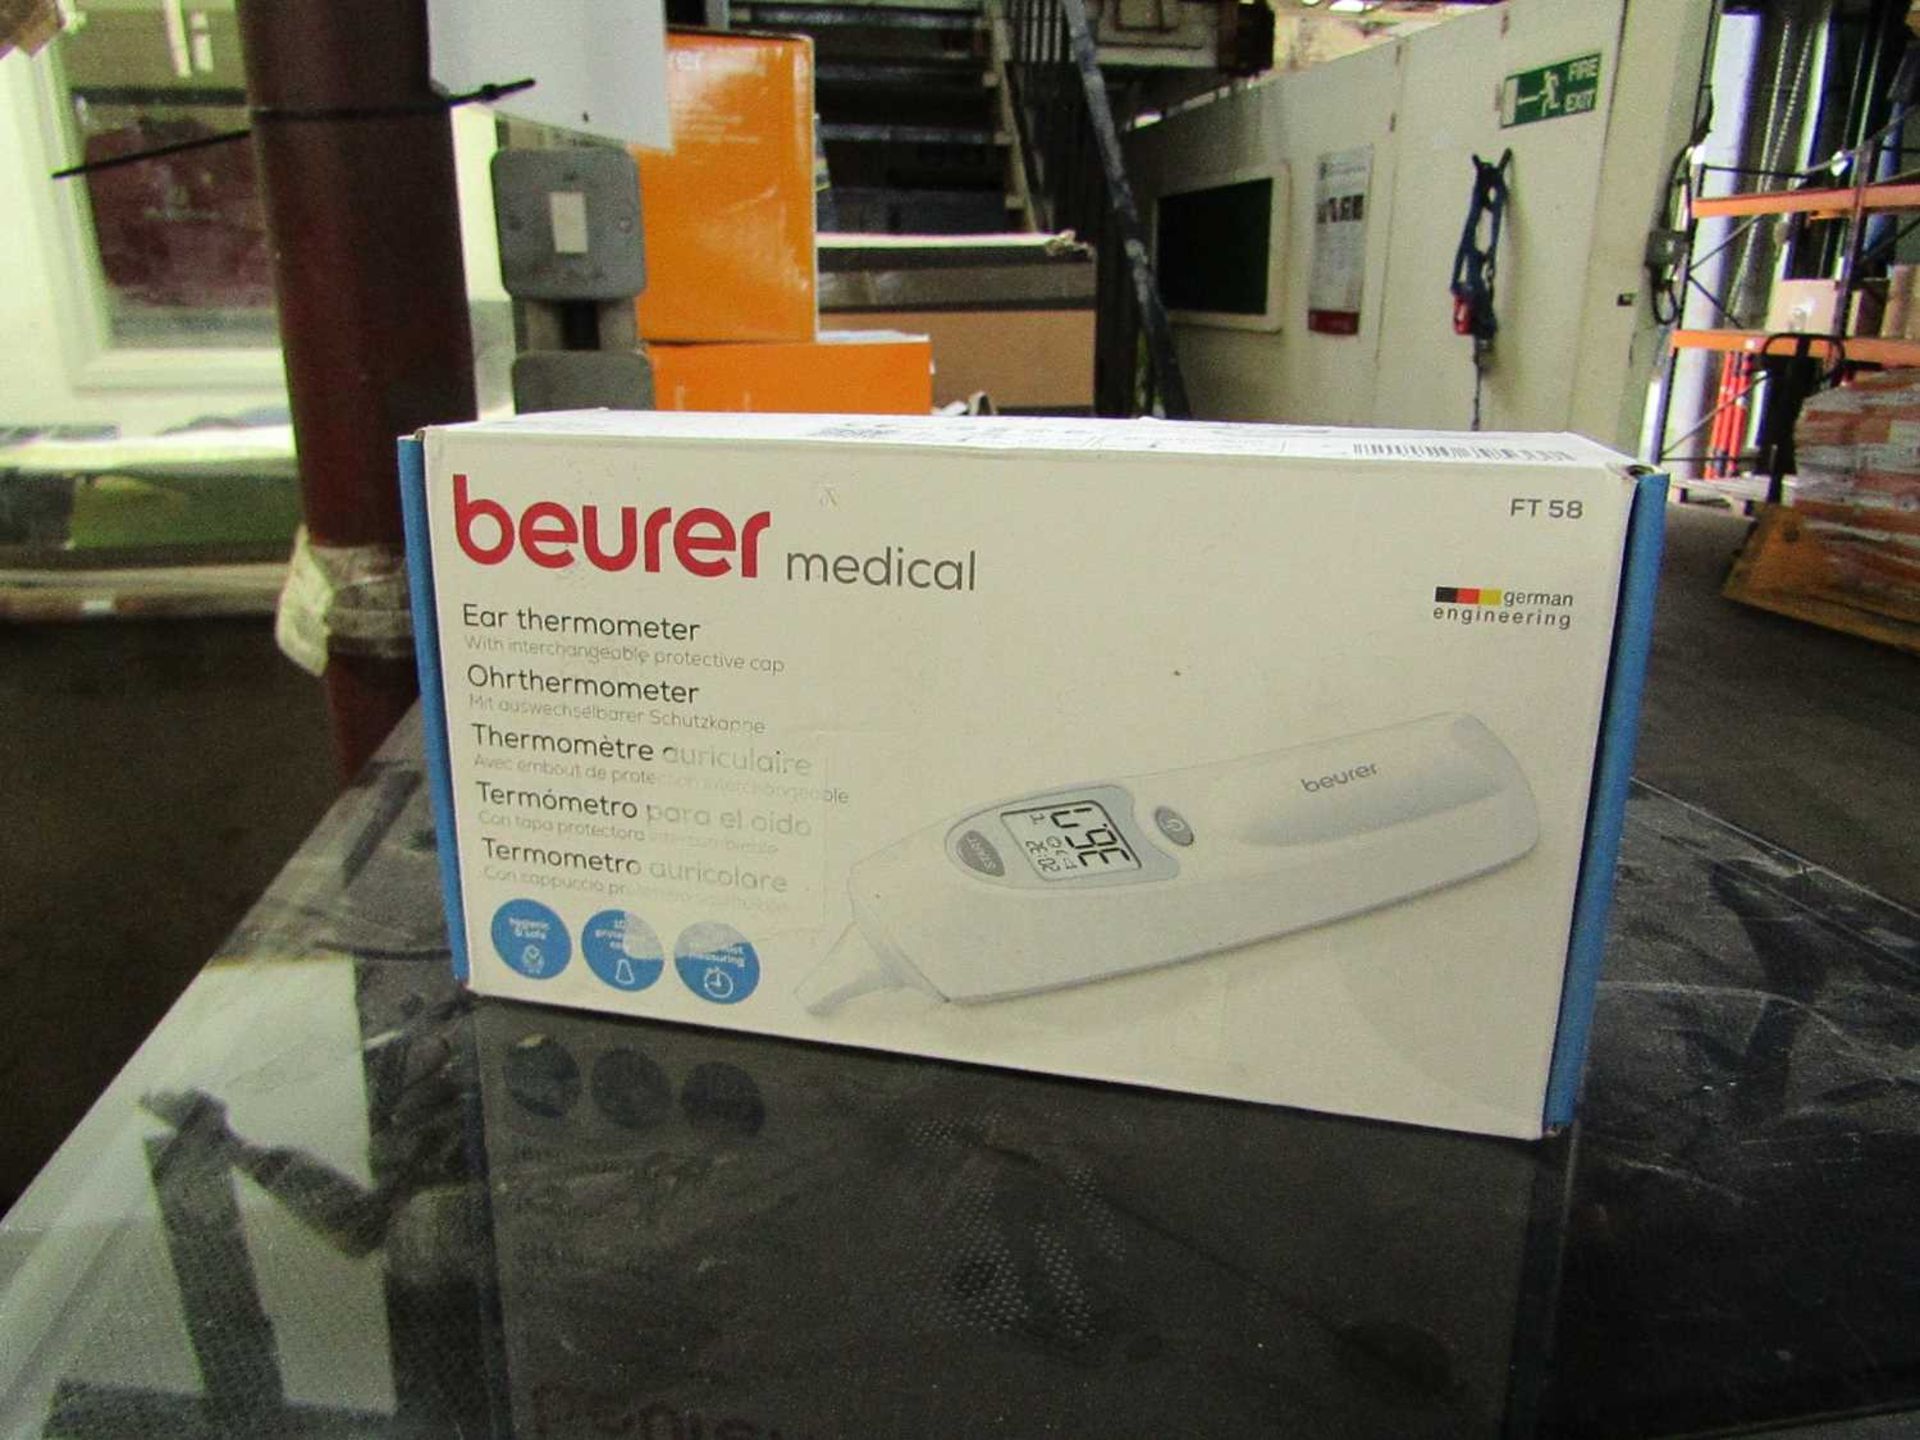 1x Beurer Medical Ear Thermometer FT58 - This item is graded B - RRP £28